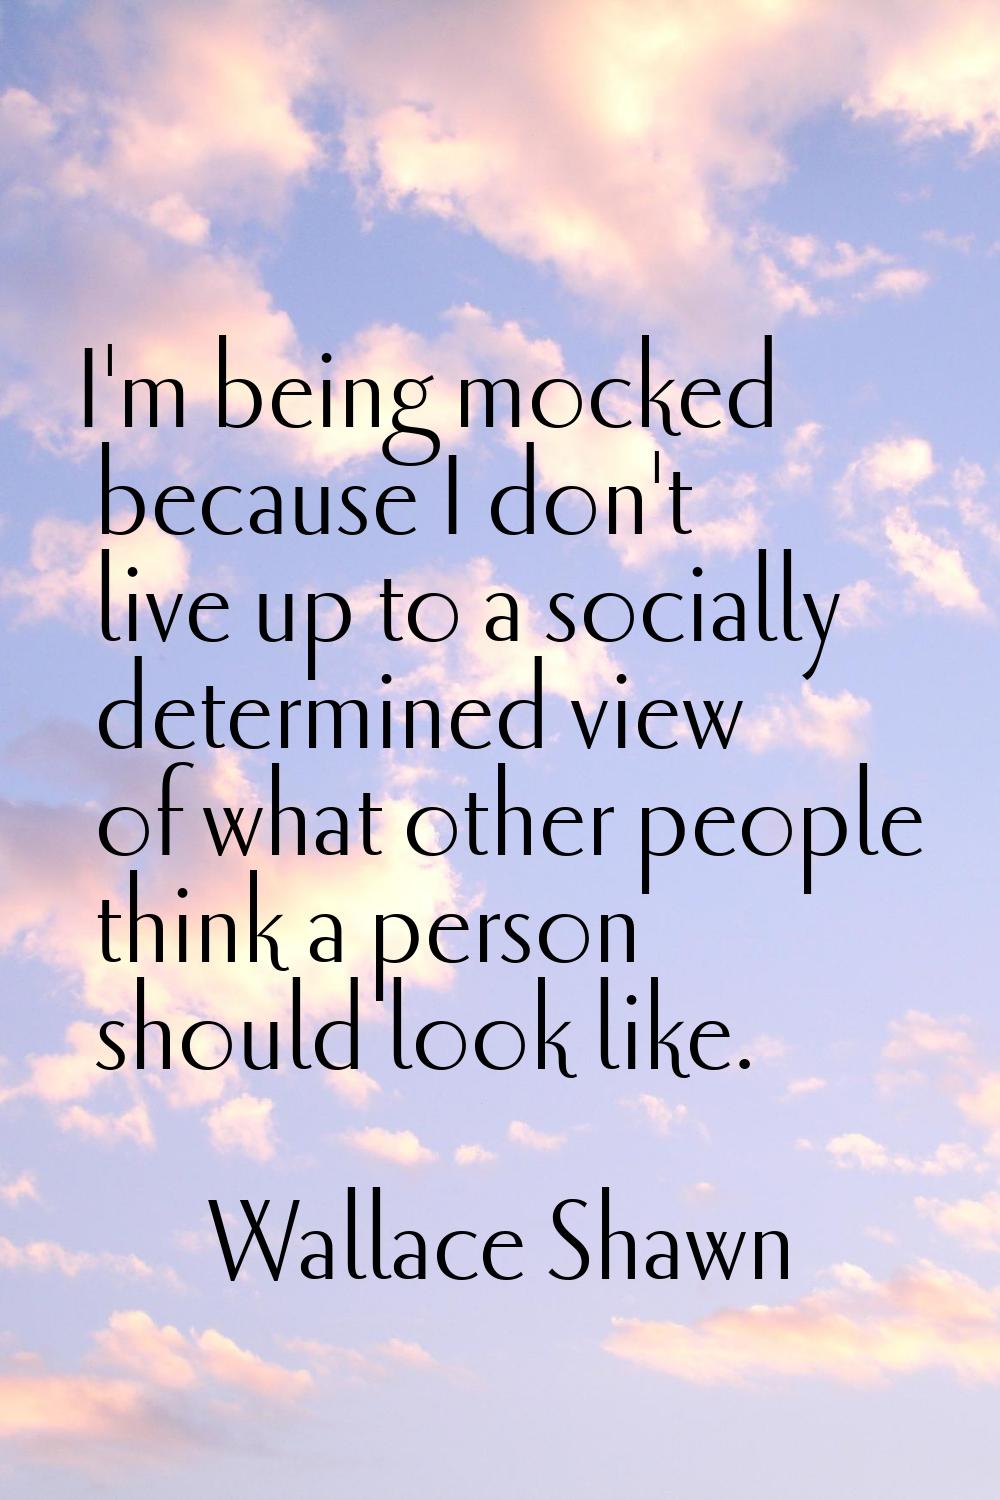 I'm being mocked because I don't live up to a socially determined view of what other people think a